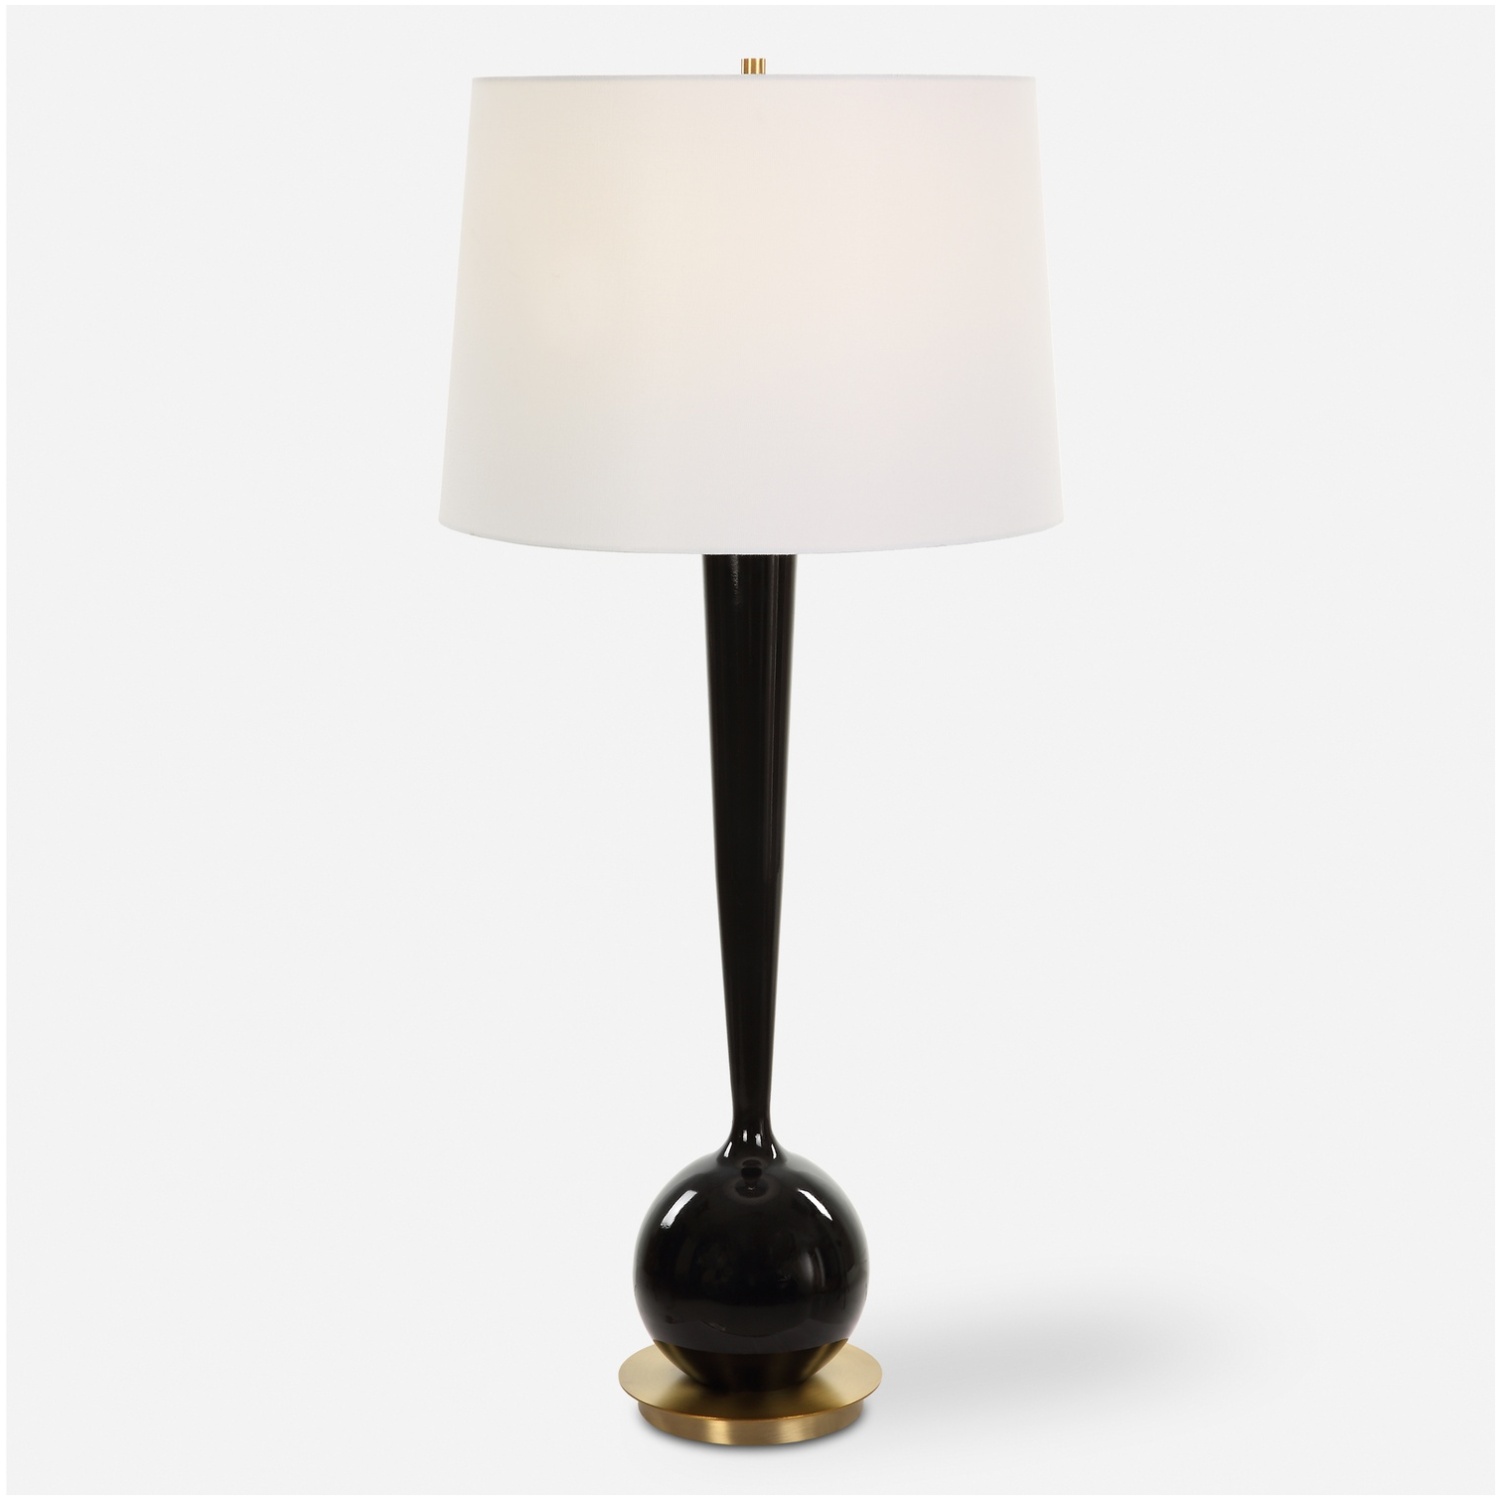 Brielle-Polished Black Table Lamp